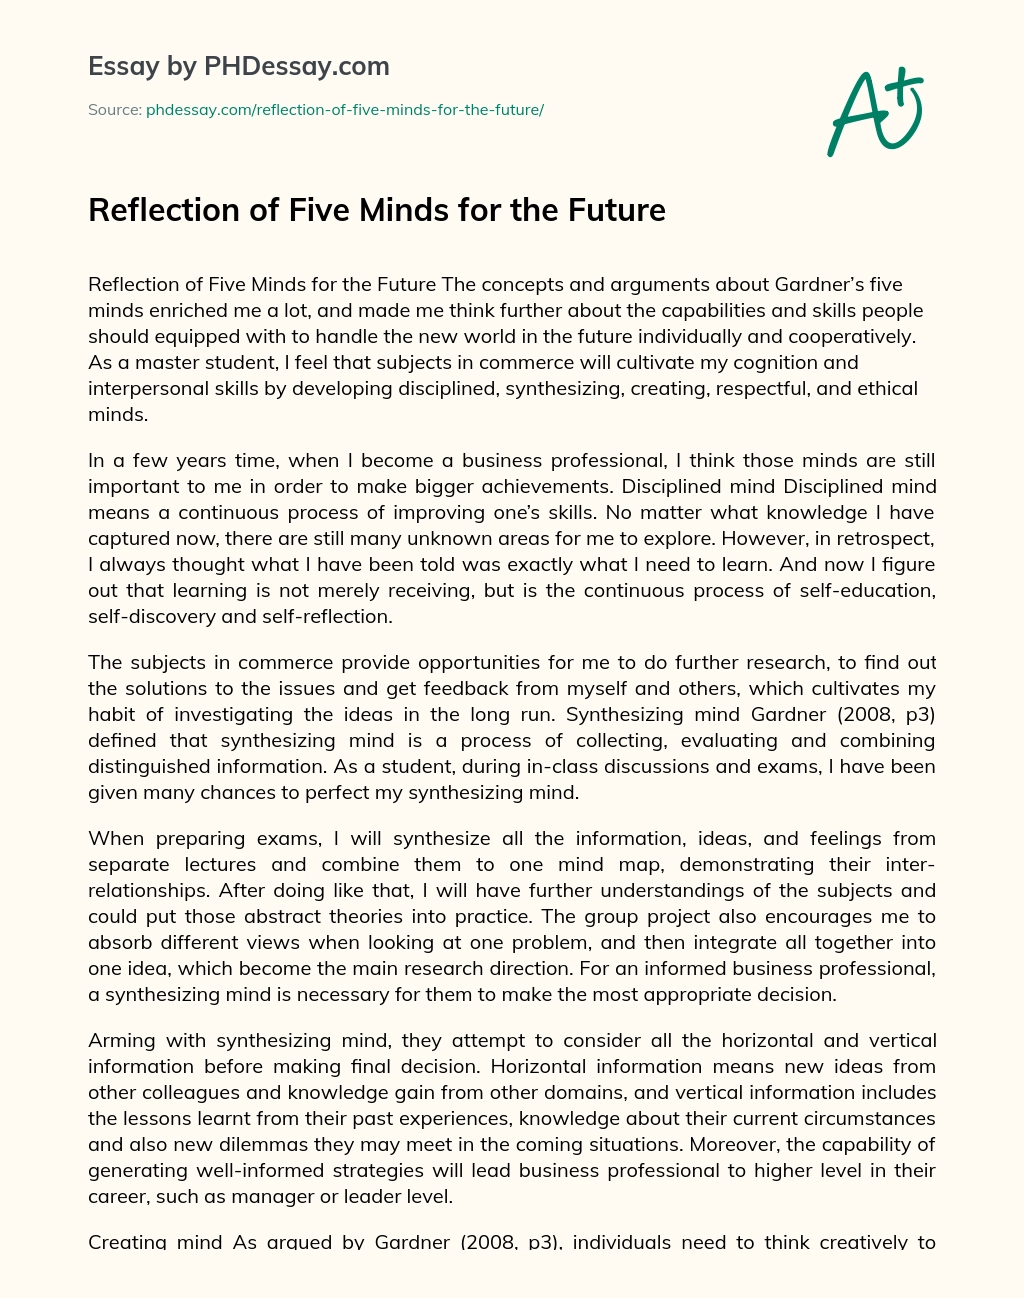 essay on creative minds connect the future